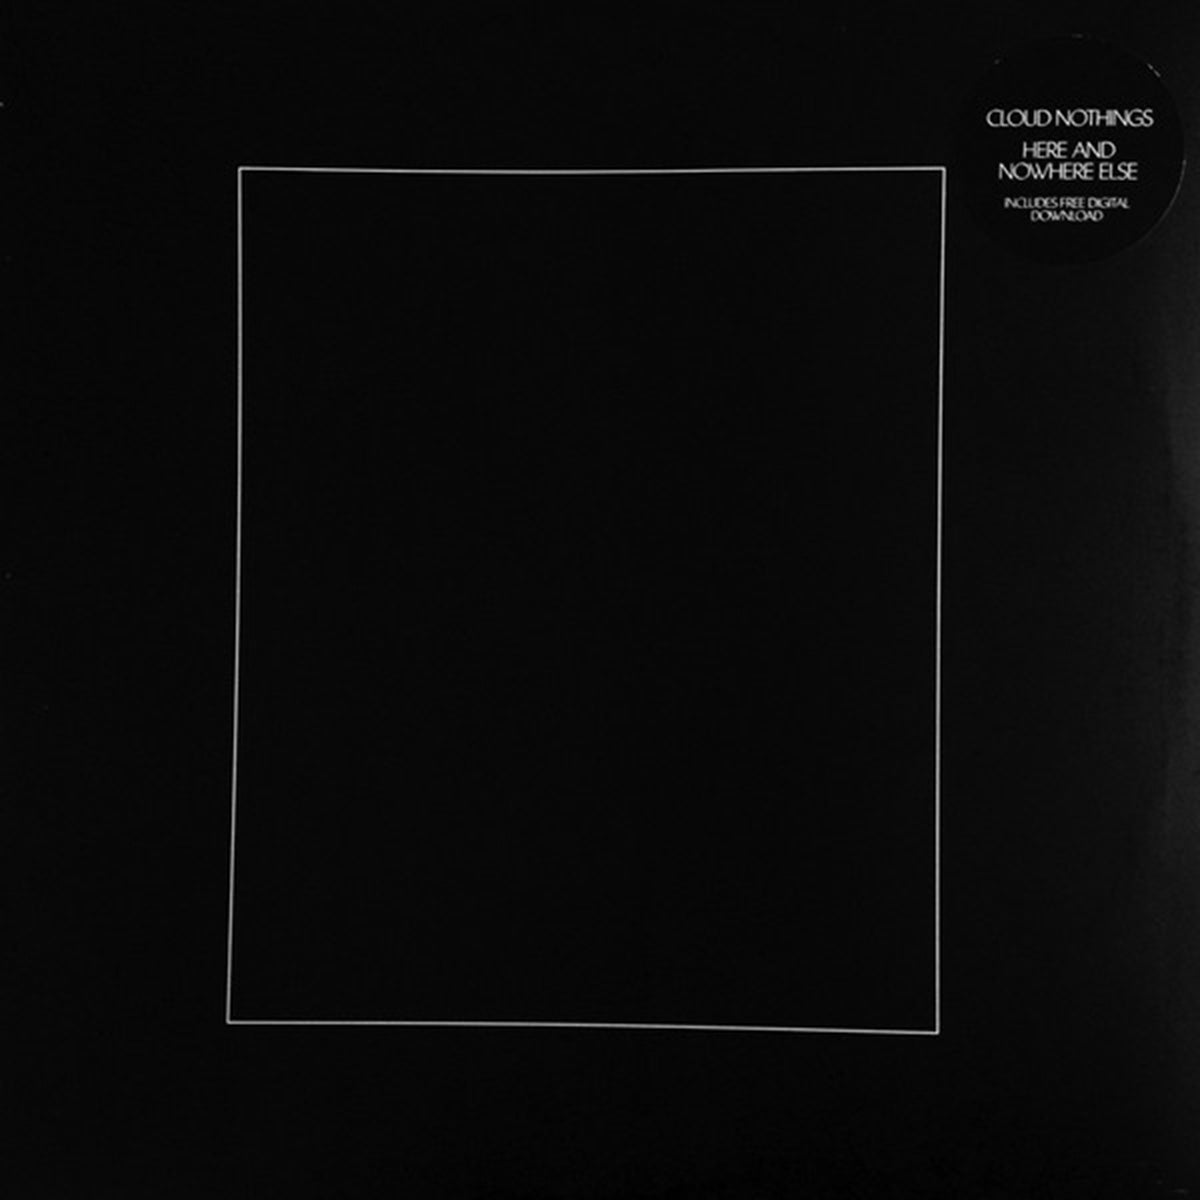 Cloud Nothings – Here And Nowhere Else